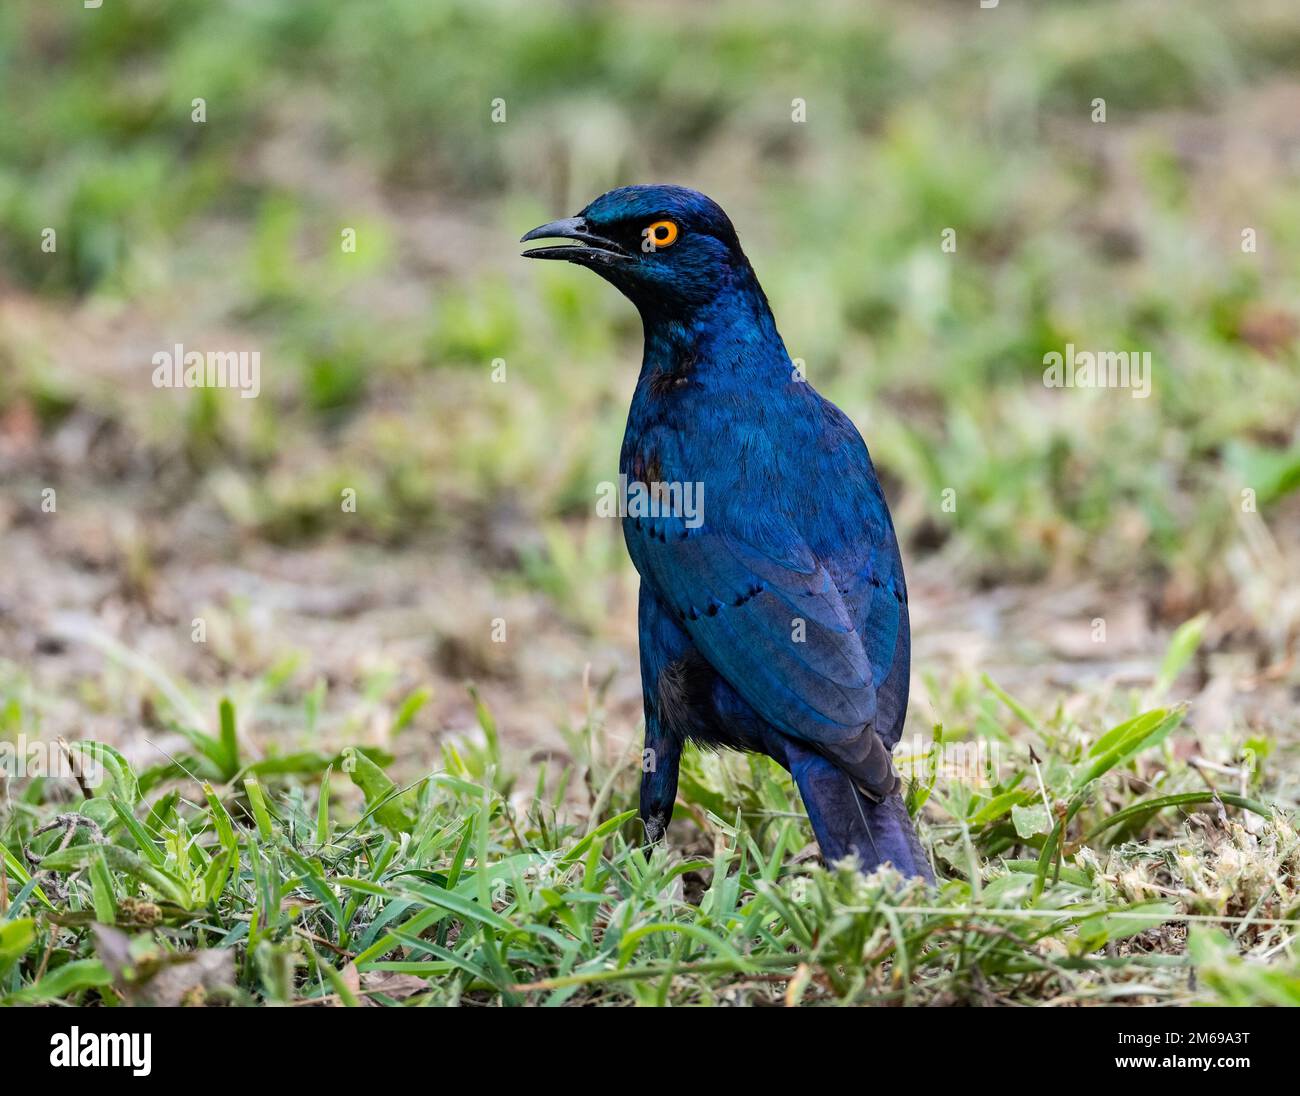 A Greater Blue-eared Starling (Lamprotornis chalybaeus) with his shinning blue feathers. Kruger National Park, South Africa. Stock Photo